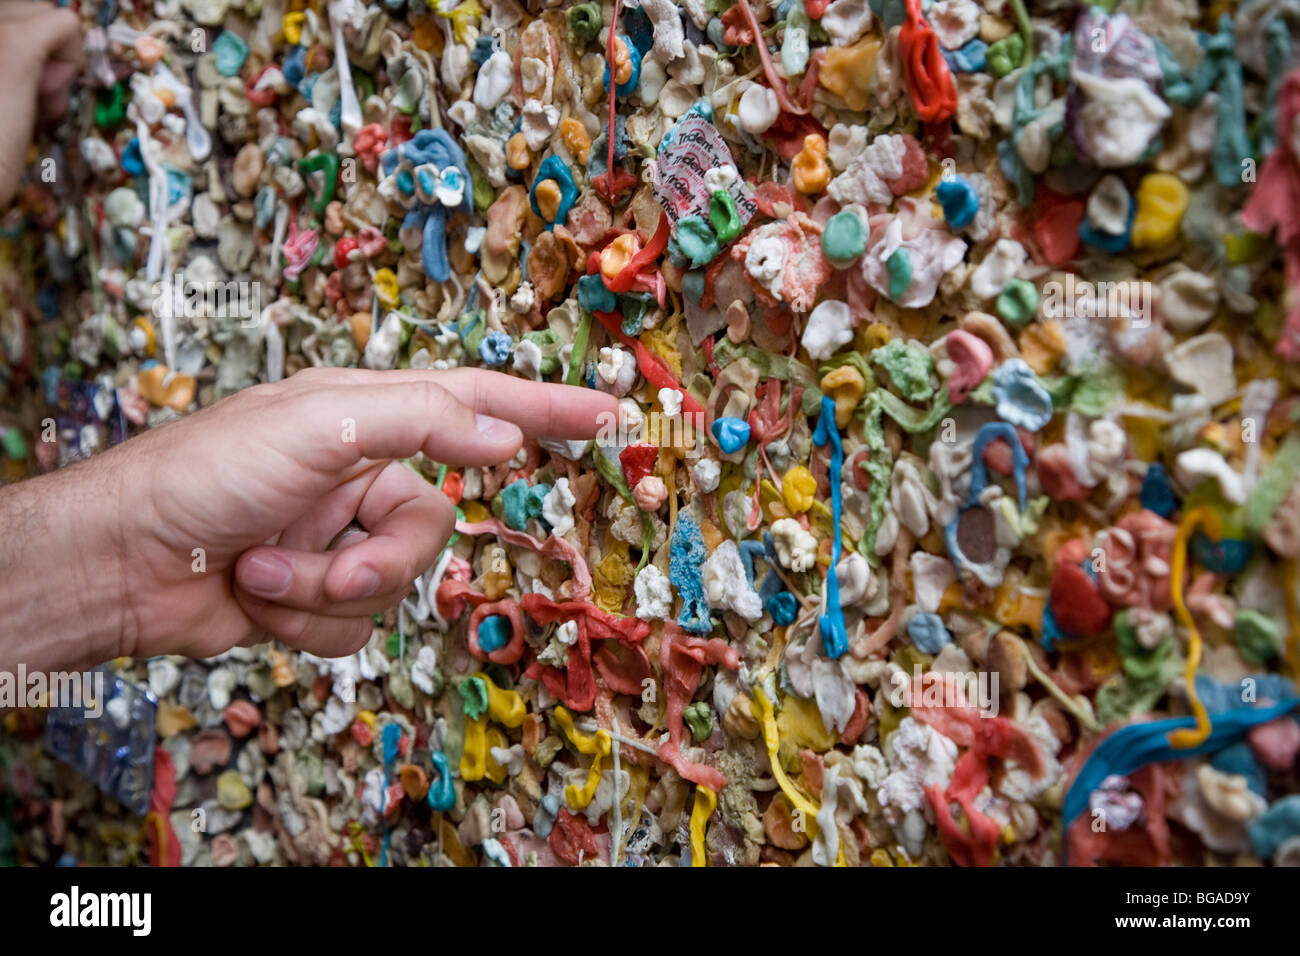 Man's hand pointing at the famous gum wall, Pike Place Market, Seattle Washington Stock Photo